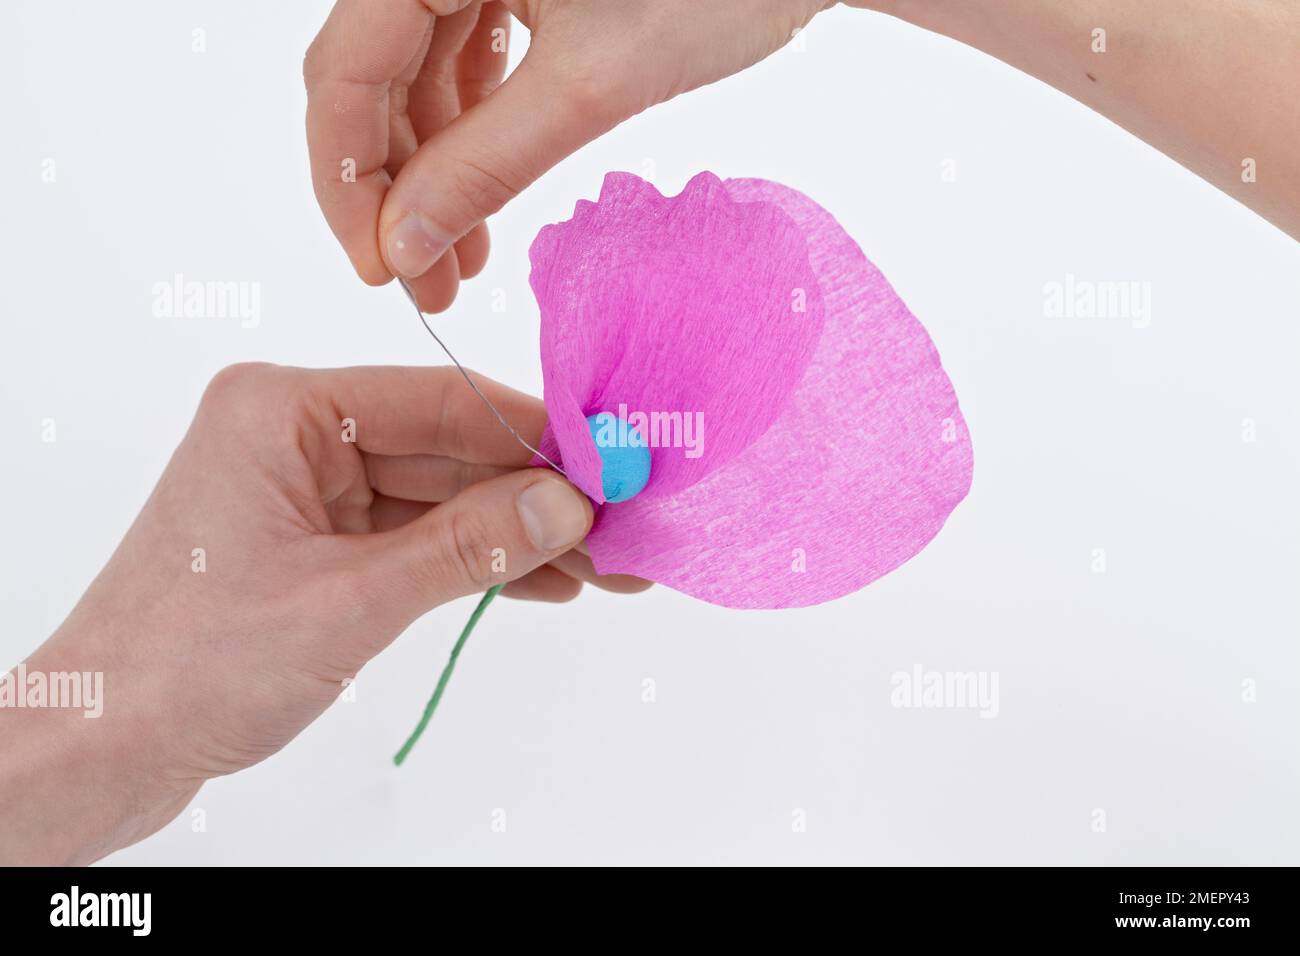 Making tissue paper flower decoration, close-up Stock Photo